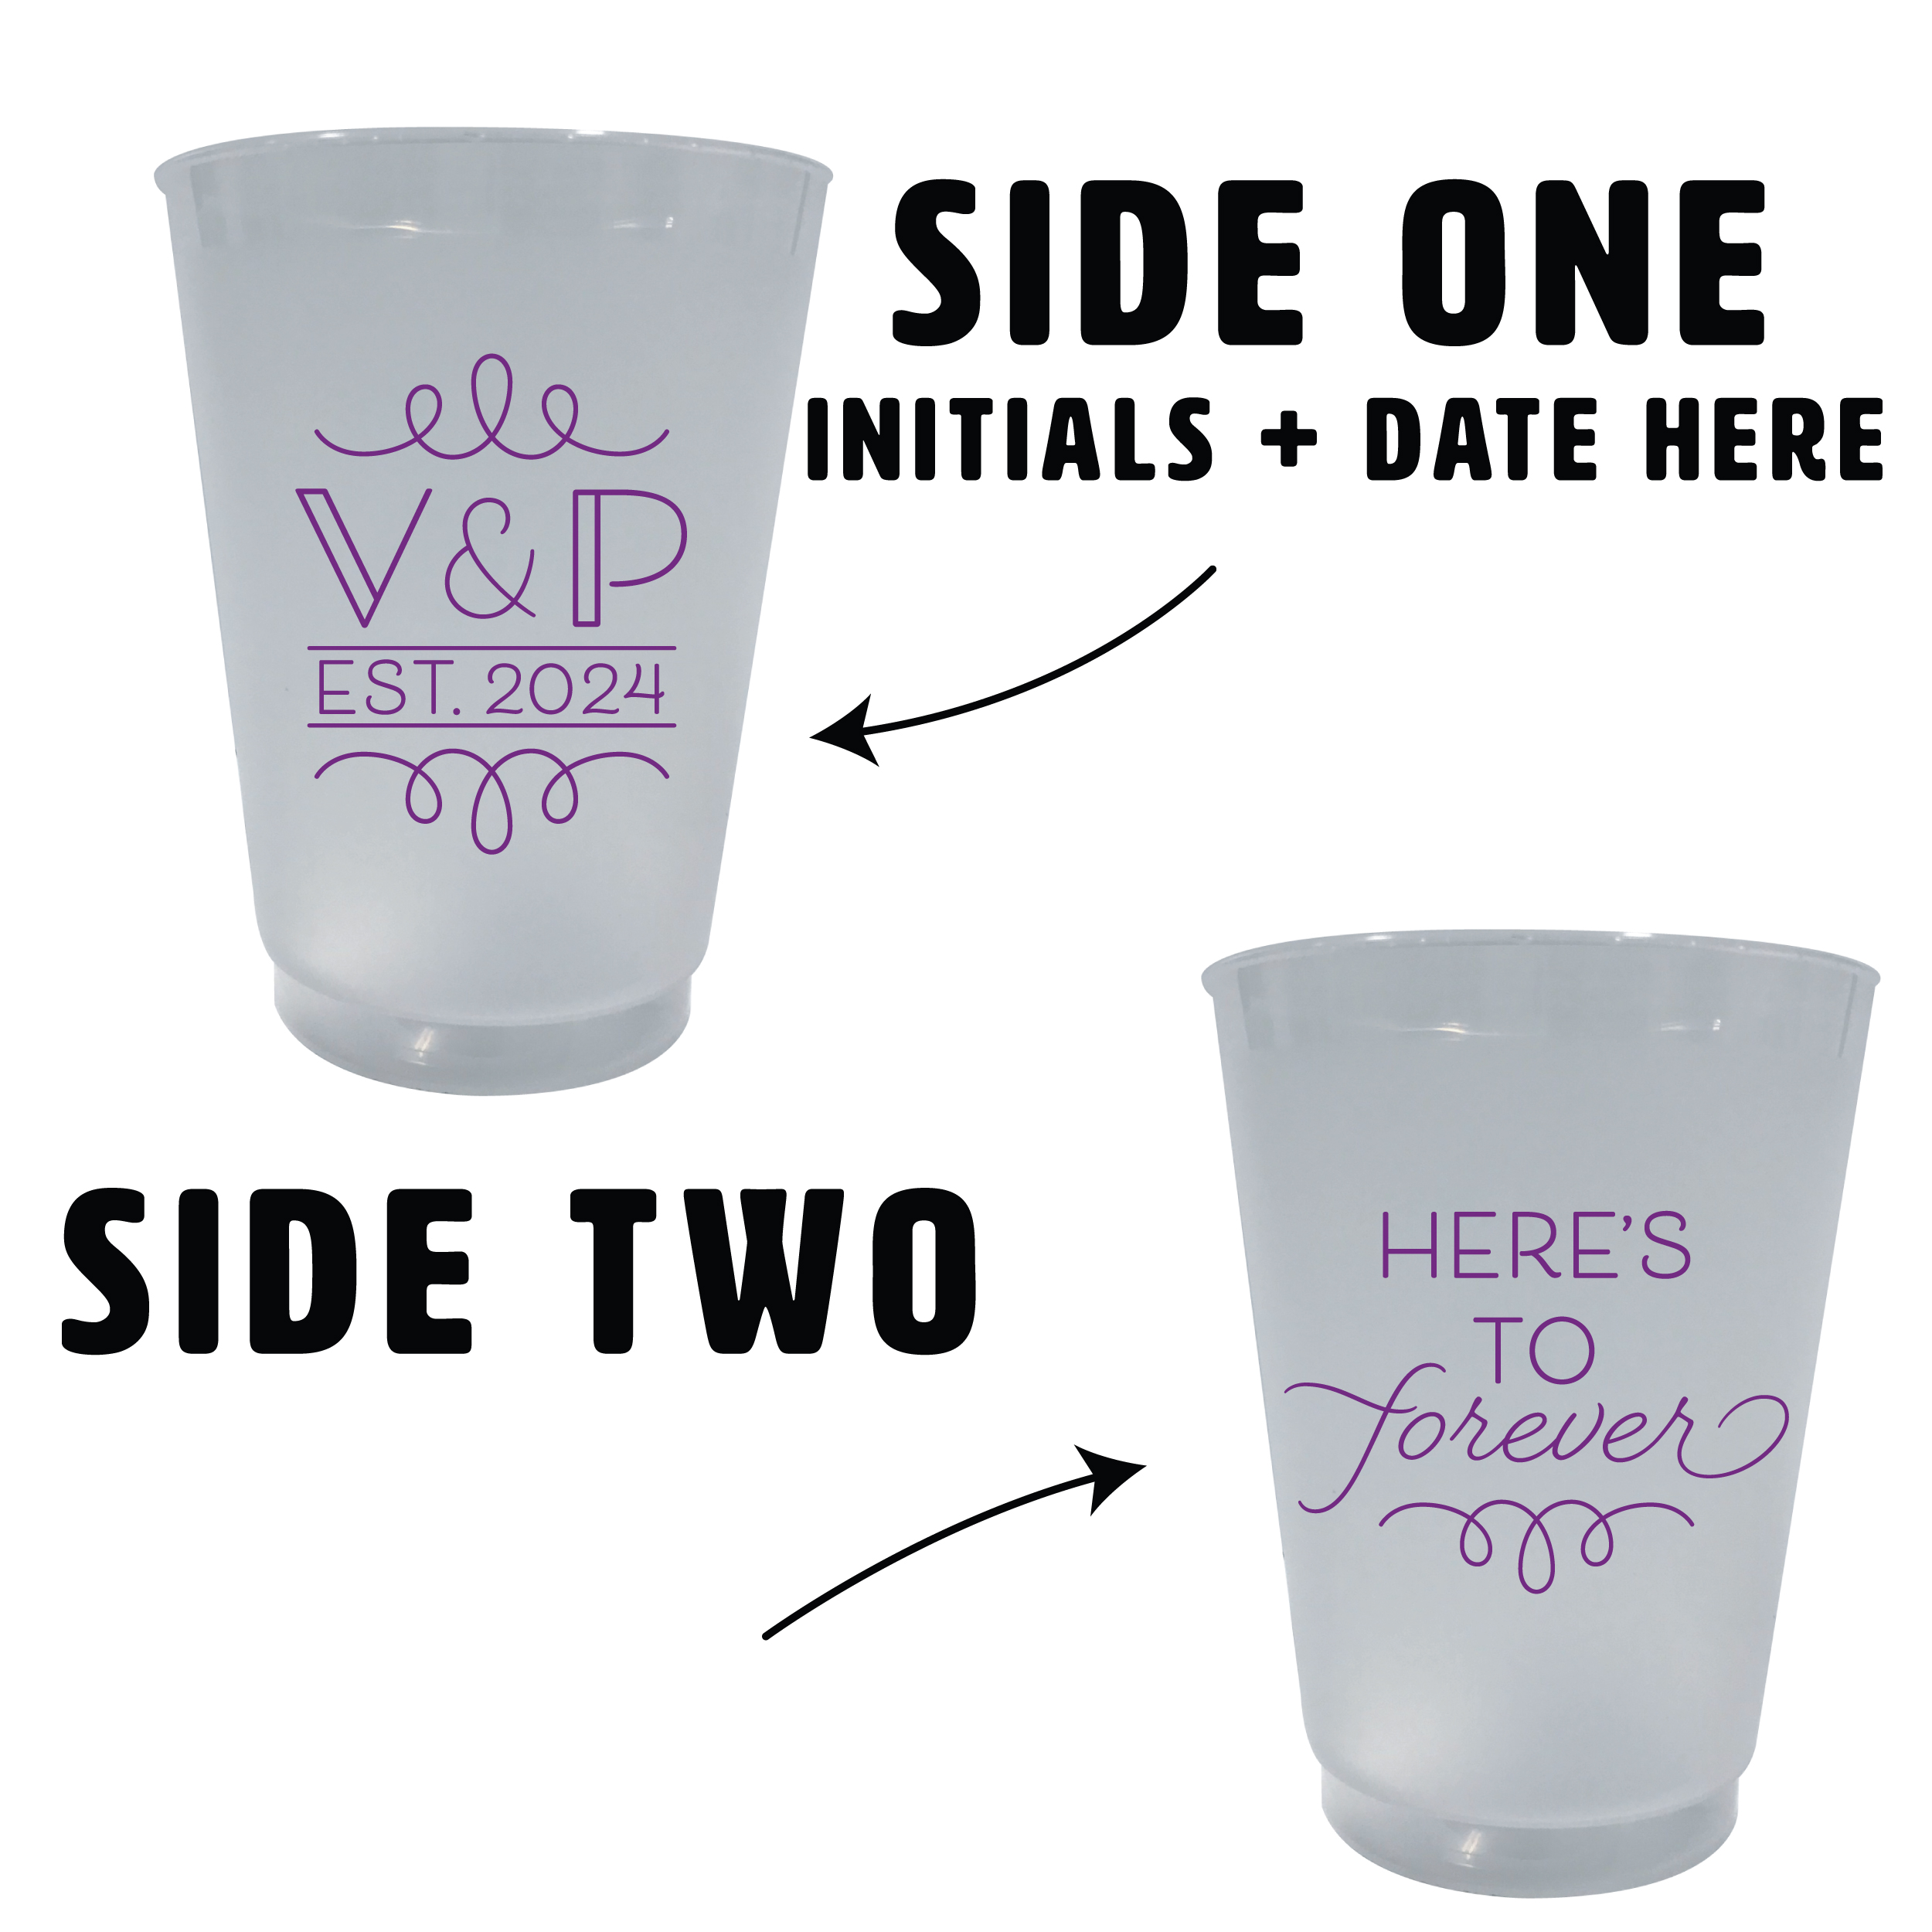 Custom Frosted Cups Wedding Favors, Plastic Cups, Cup